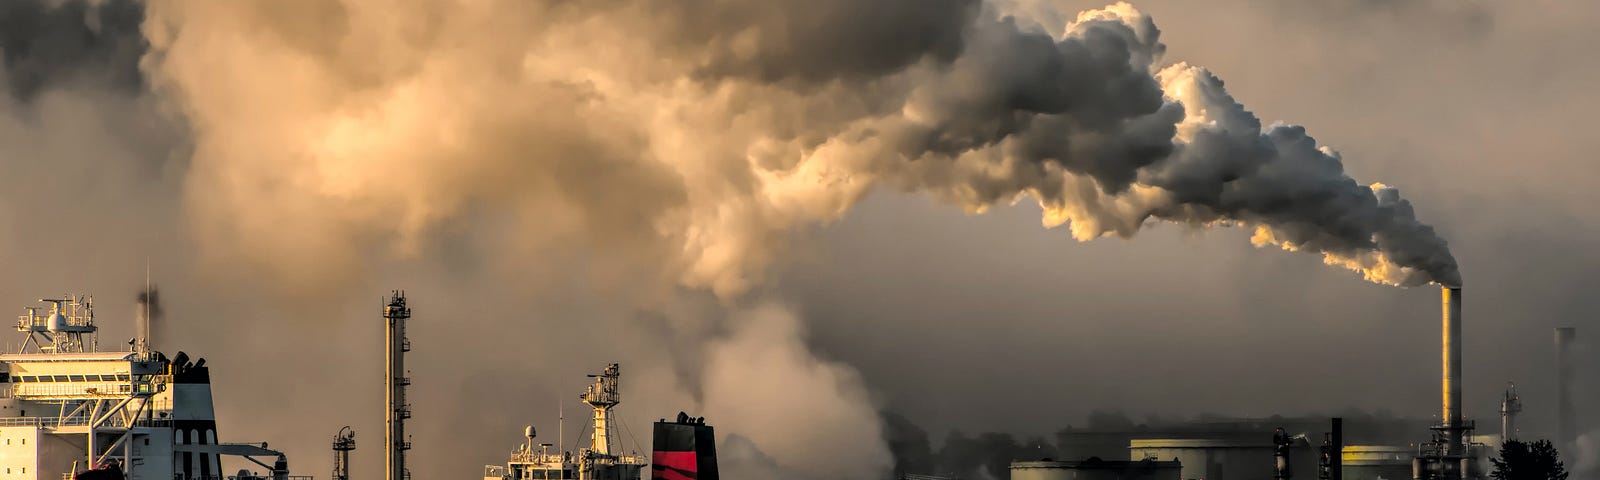 Photo of a factory smoke stack spewing out a great cloud of gray smoke over an industrial setting.